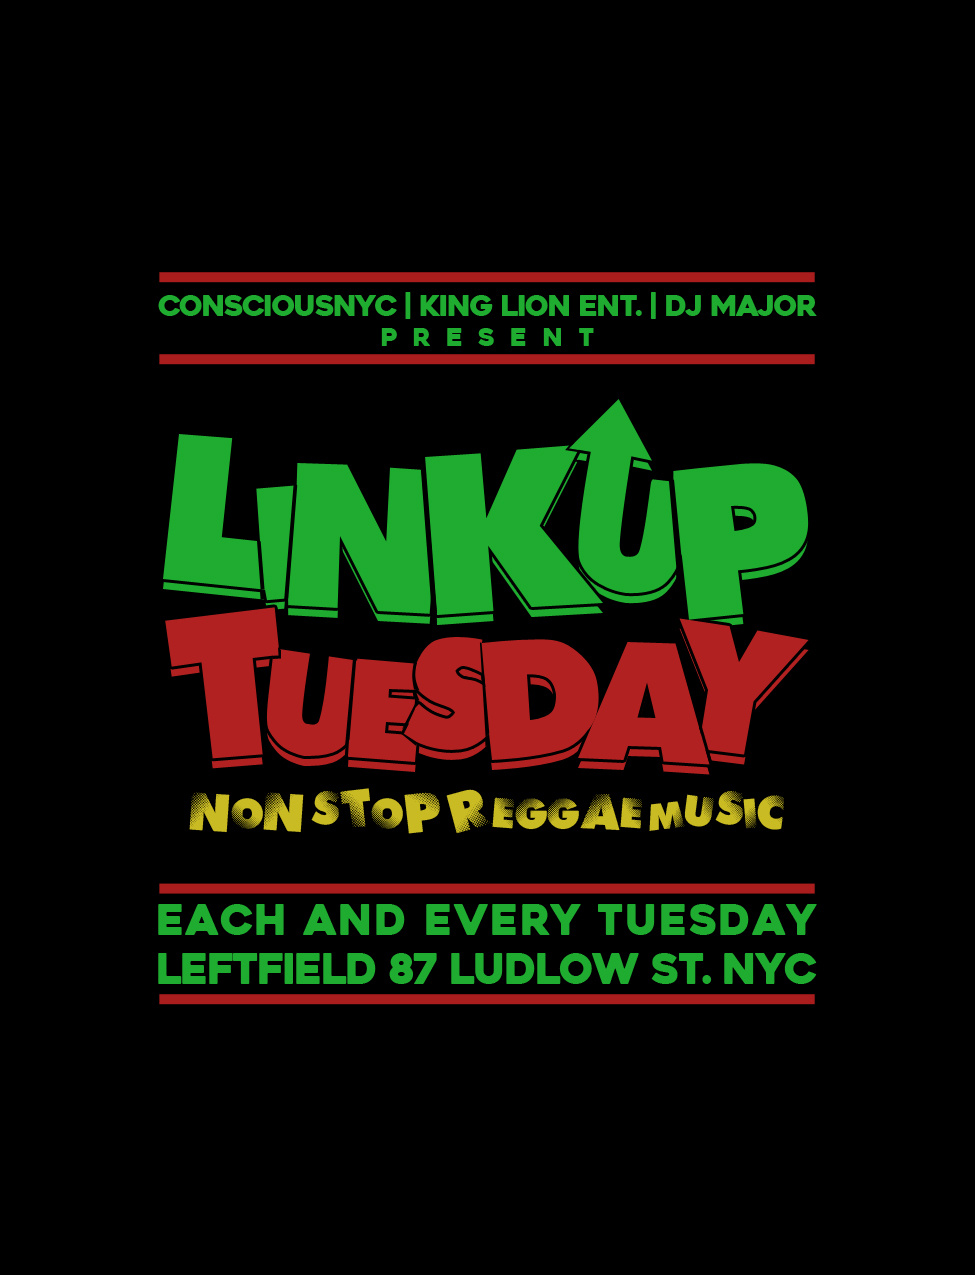 LINK UP TUESDAY